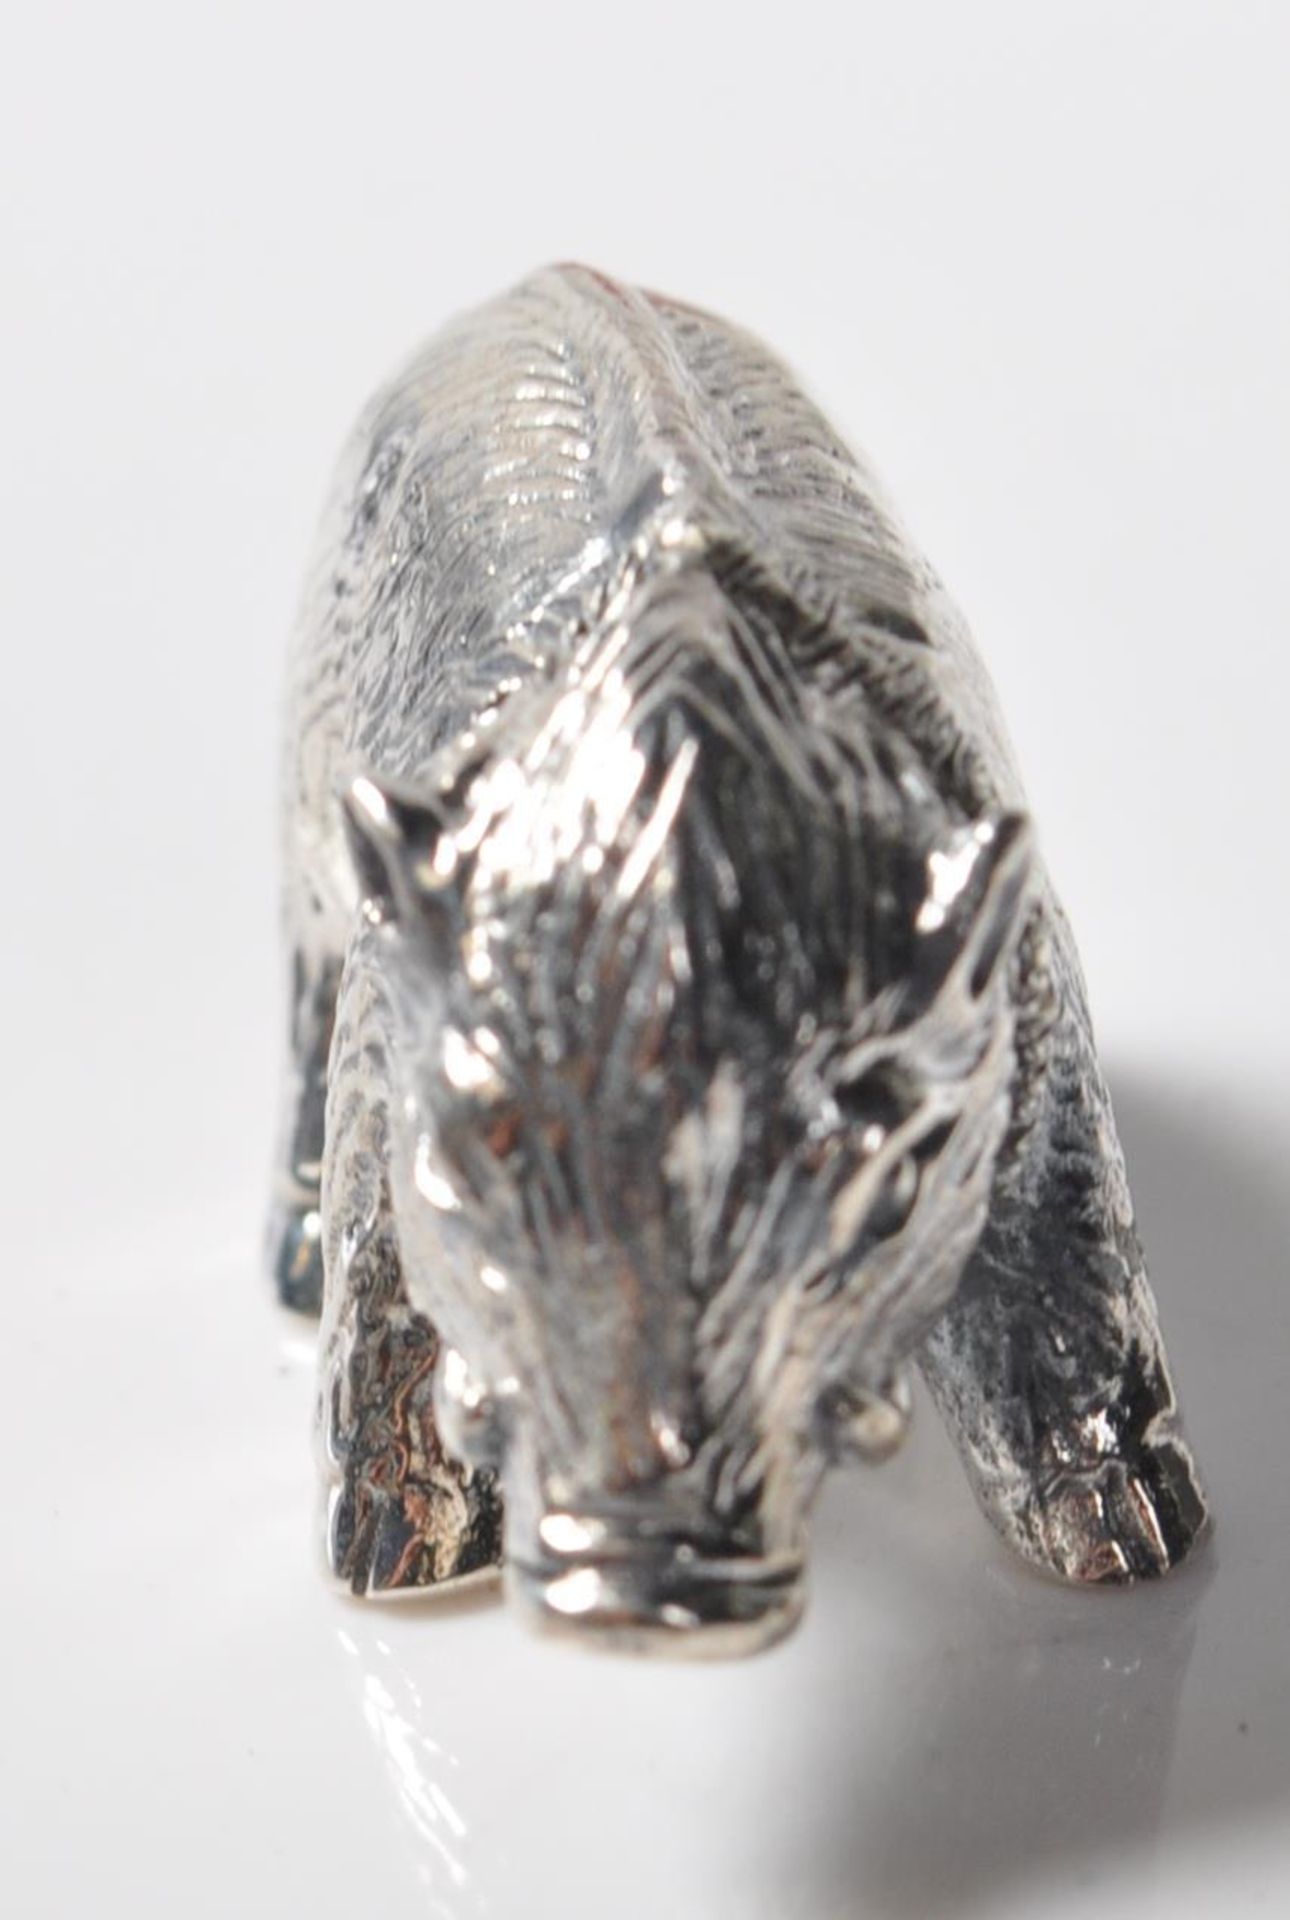 STAMPED STERLING SILVER MINIATURE TRUFFLE PIG - Image 2 of 5